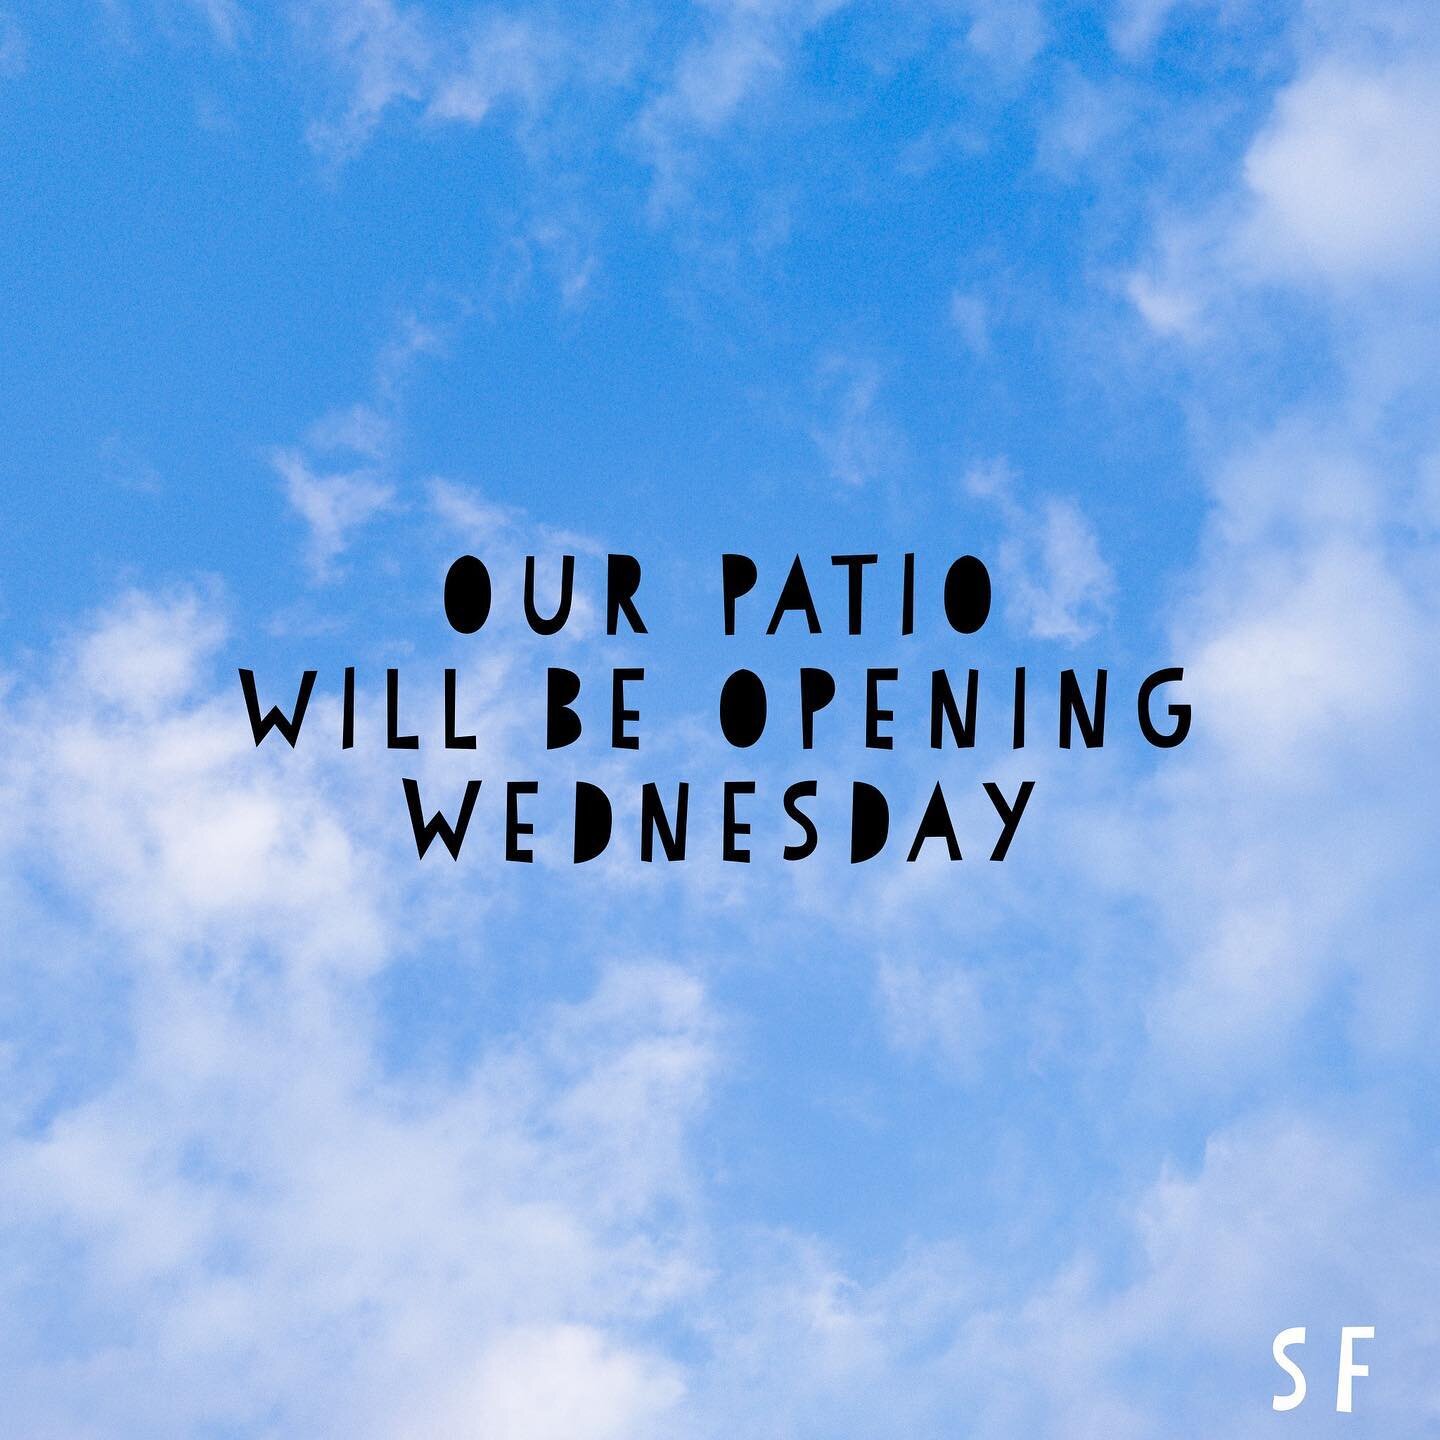 We know you&rsquo;ve all been waiting... our patio will be opening up on Wednesday this week! Let&rsquo;s enjoy some delicious food, cold beverages, and sunshine! 😎